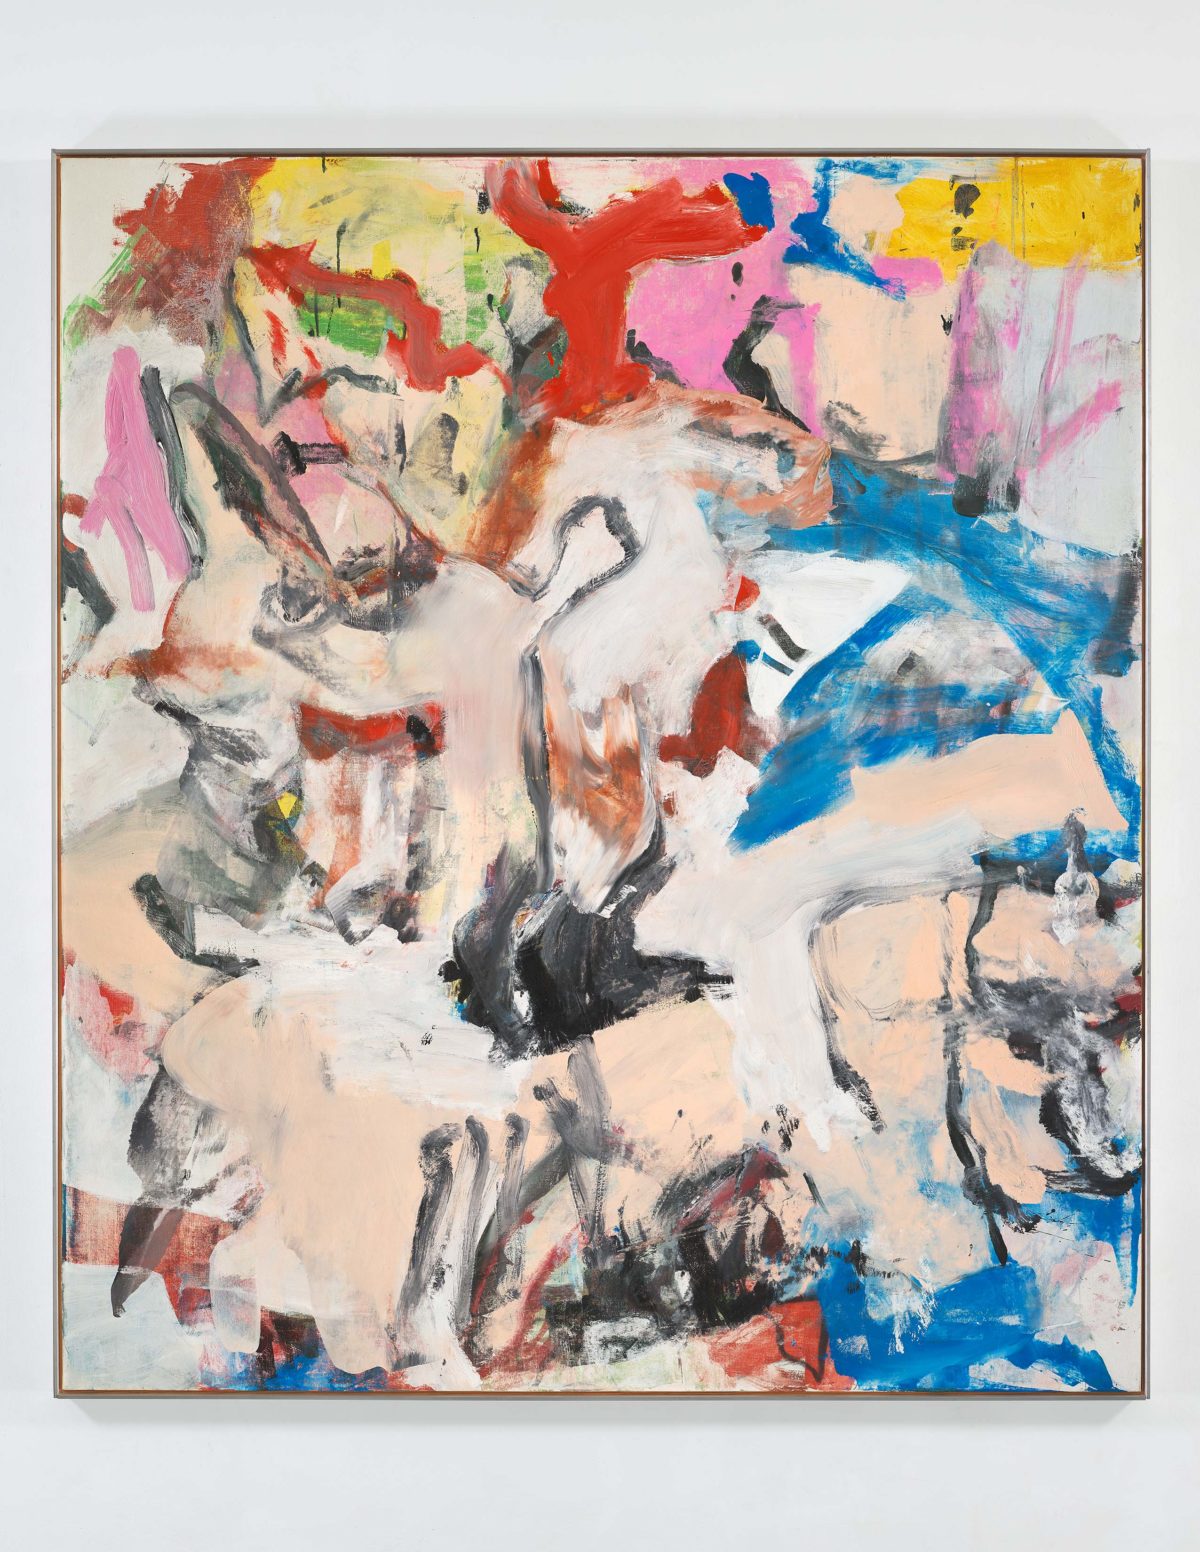 Williem de Kooning, Untitled XII, 1975 Oil on canvas 79 ¾ x 69 ¾ inches (202.6 x 177.2 cm) © The Willem de Kooning Foundation / Artists Rights Society (ARS), New York